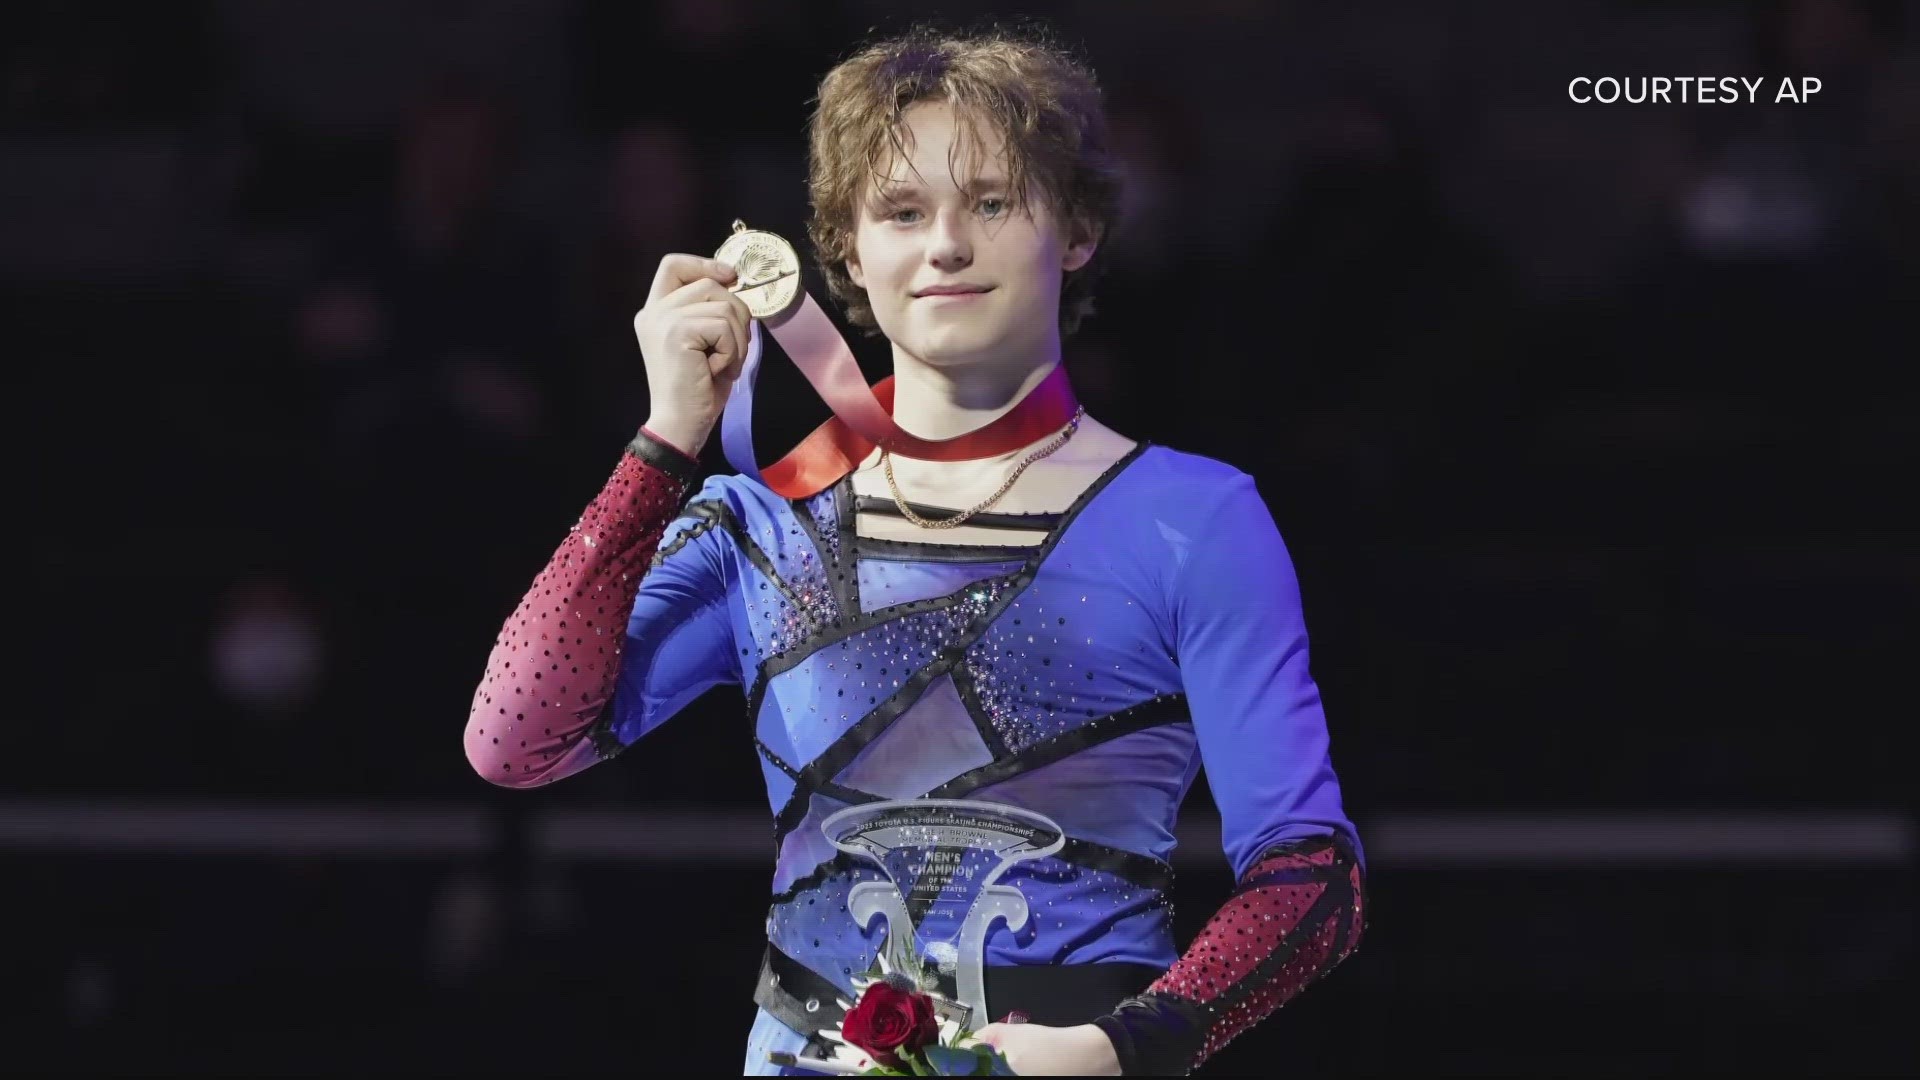 He leaped into the record books at the World Figure Skating Championships.